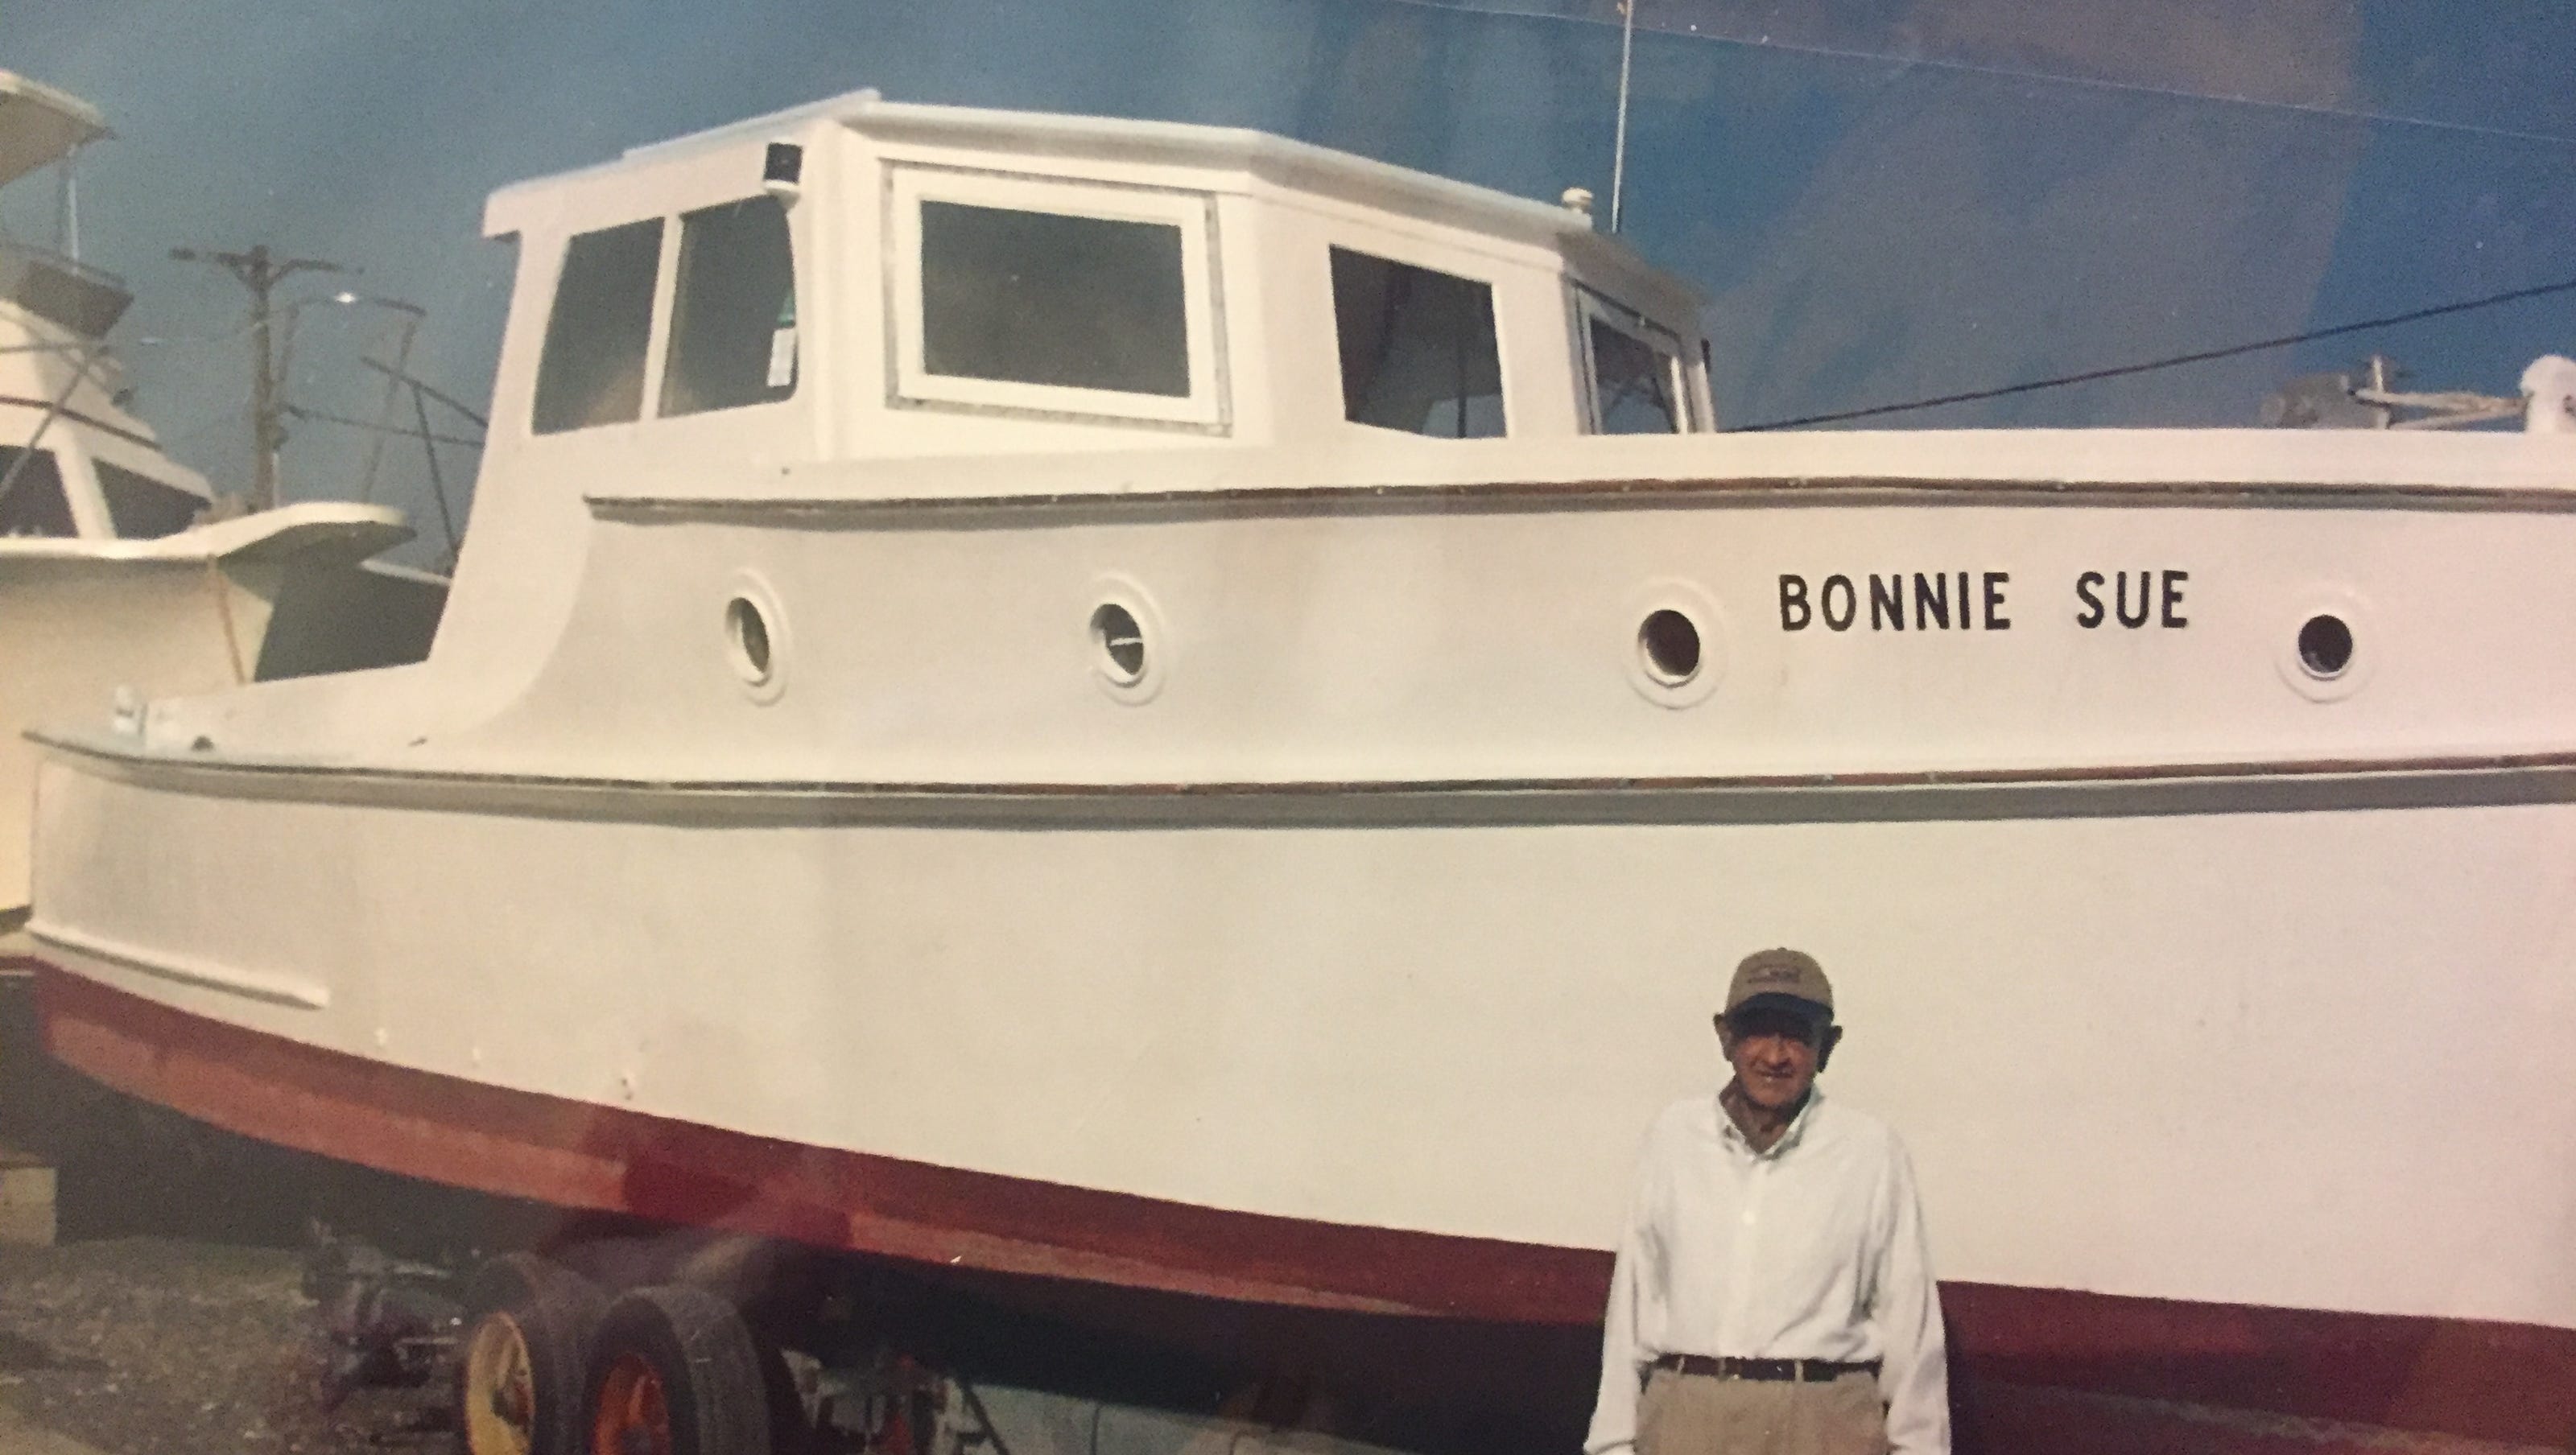  Wachapreague's Captain Bobby Turner: 70 years fishing on the Bonnie Sue 